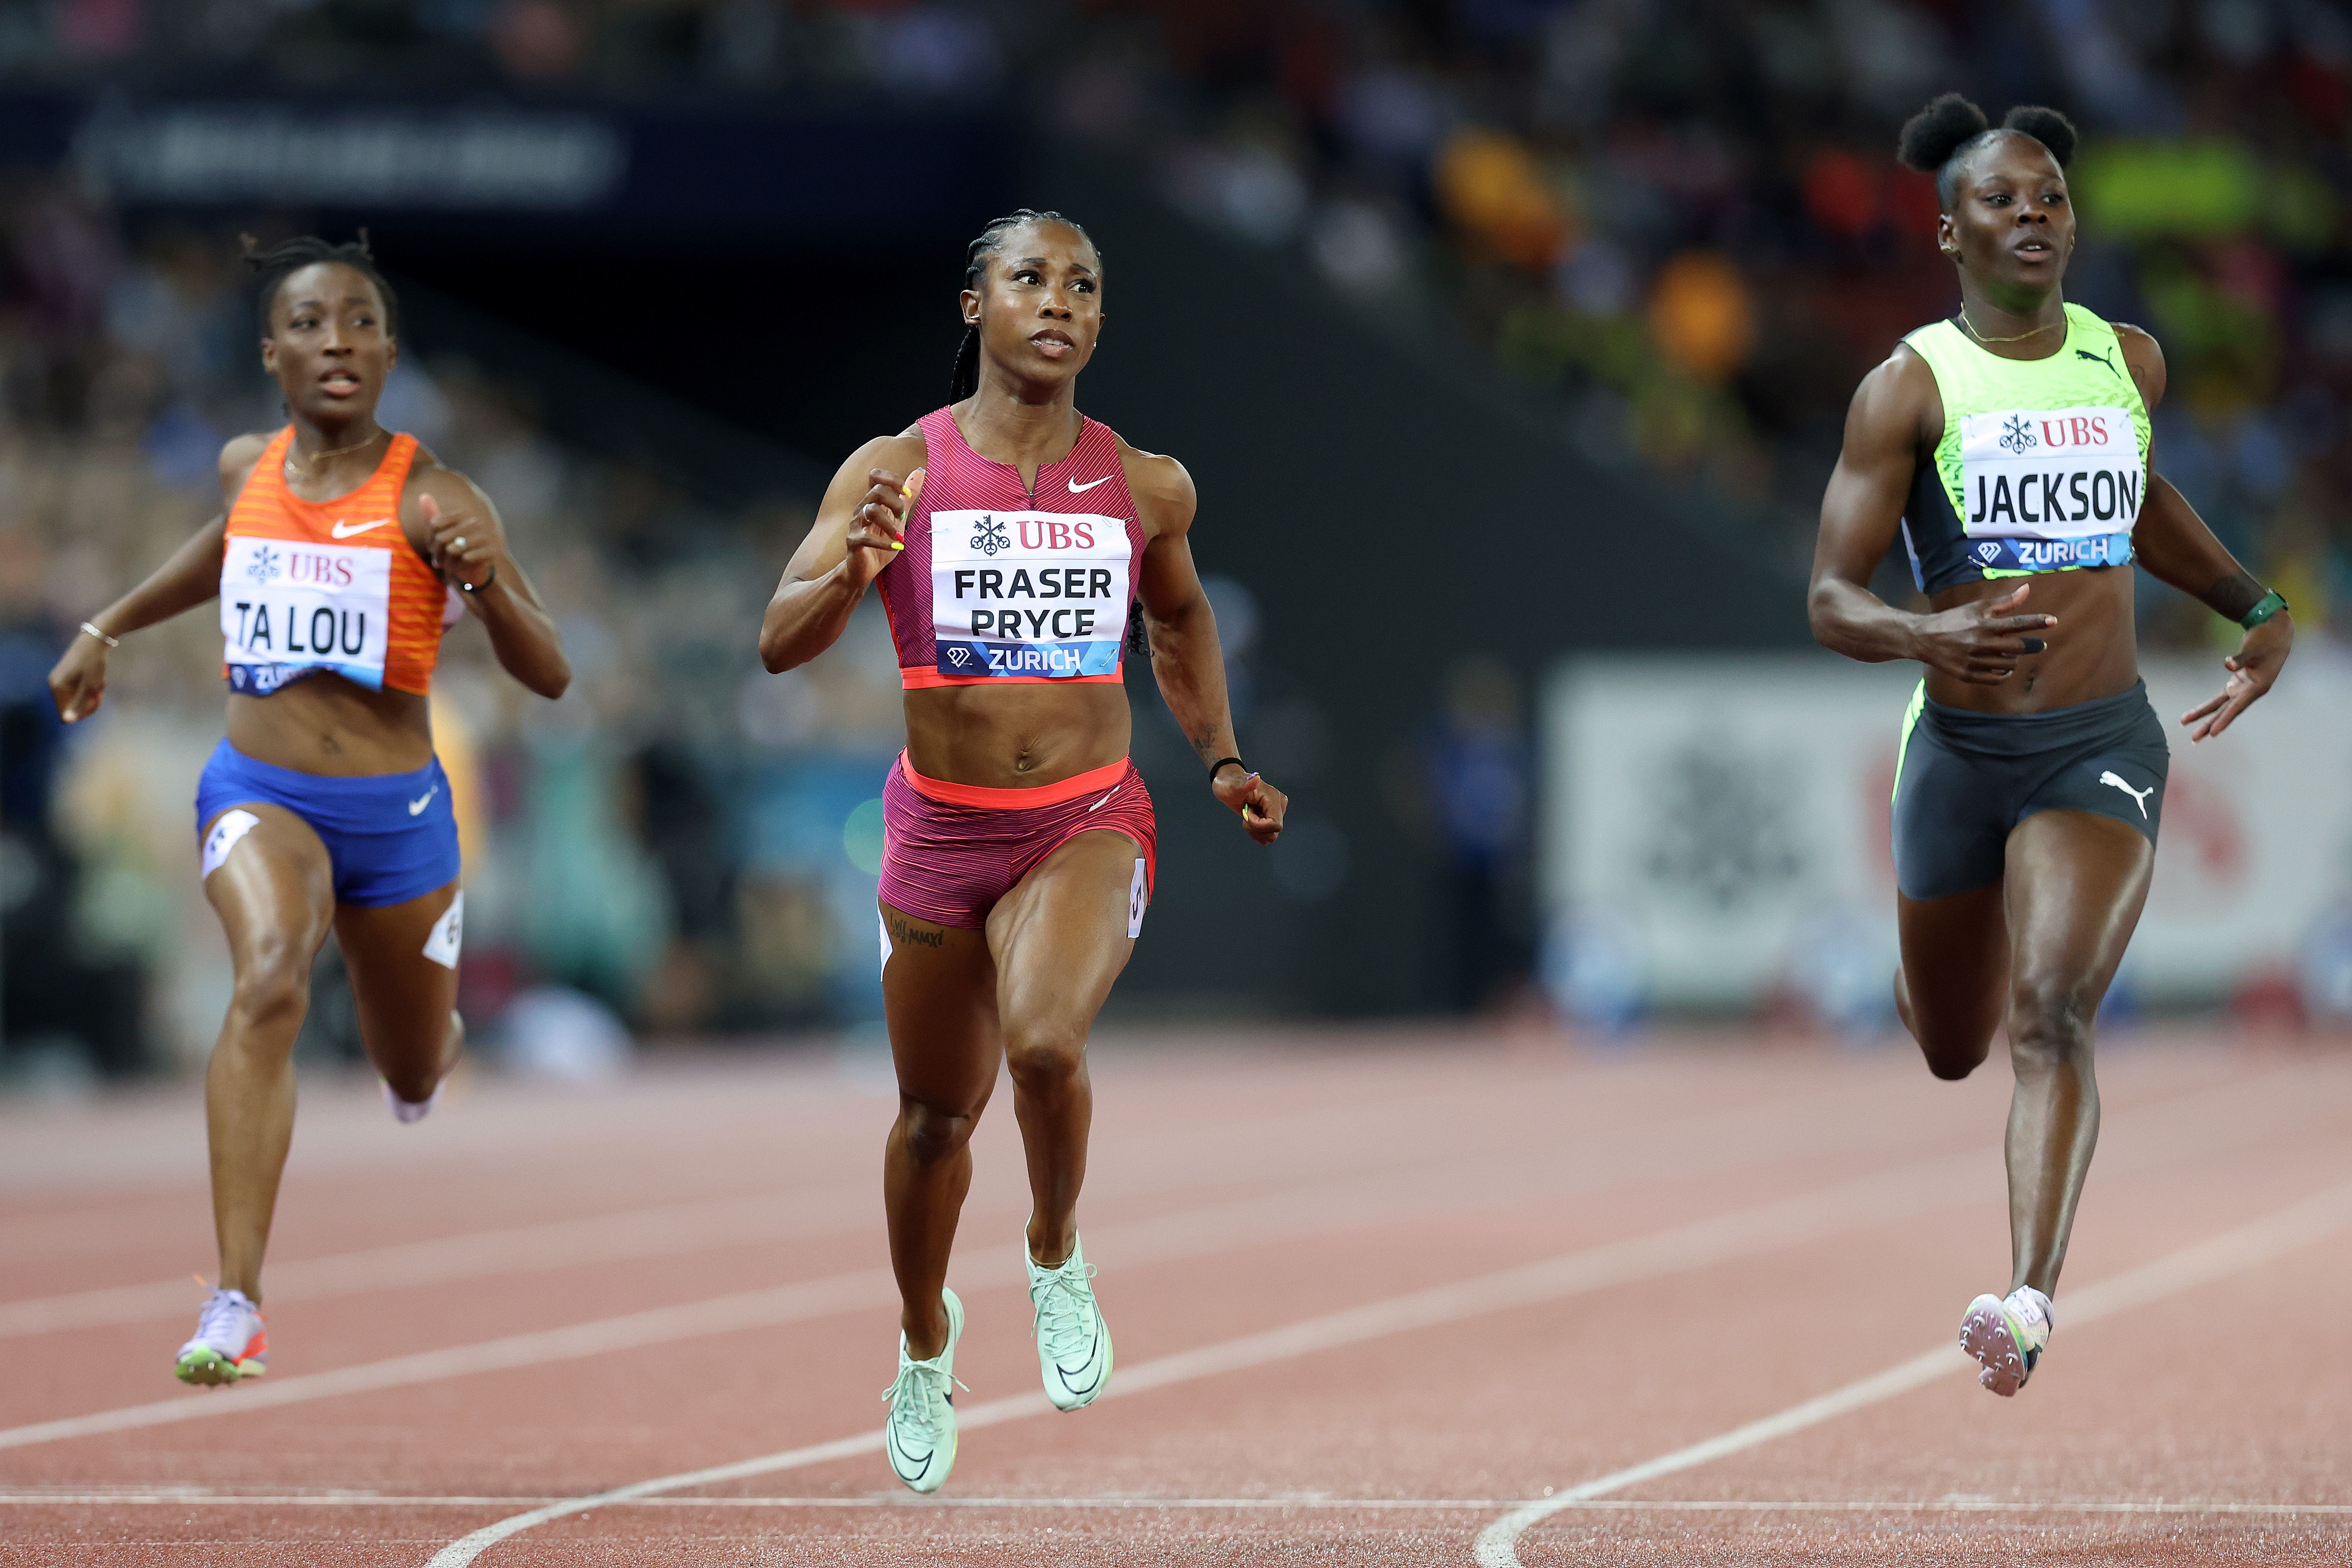 Shelly-Ann Fraser-Pryce wins the 100m at the Wanda Diamond League Final in Zurich